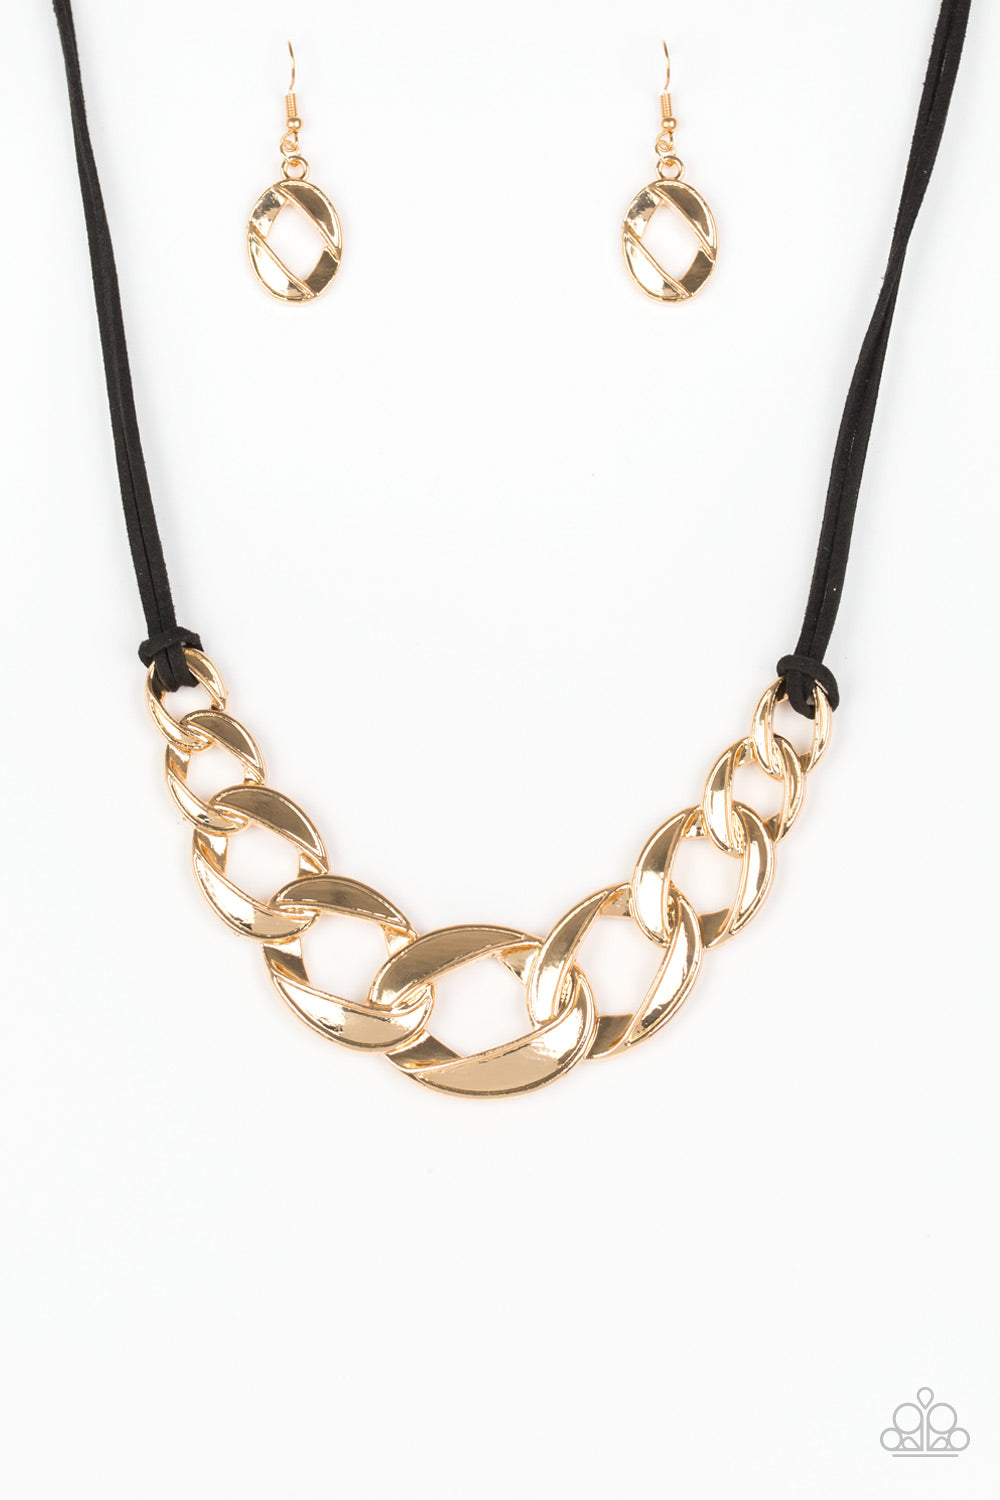 Paparazzi Accessories Naturally Nautical - Gold Necklace - Be Adored Jewelry